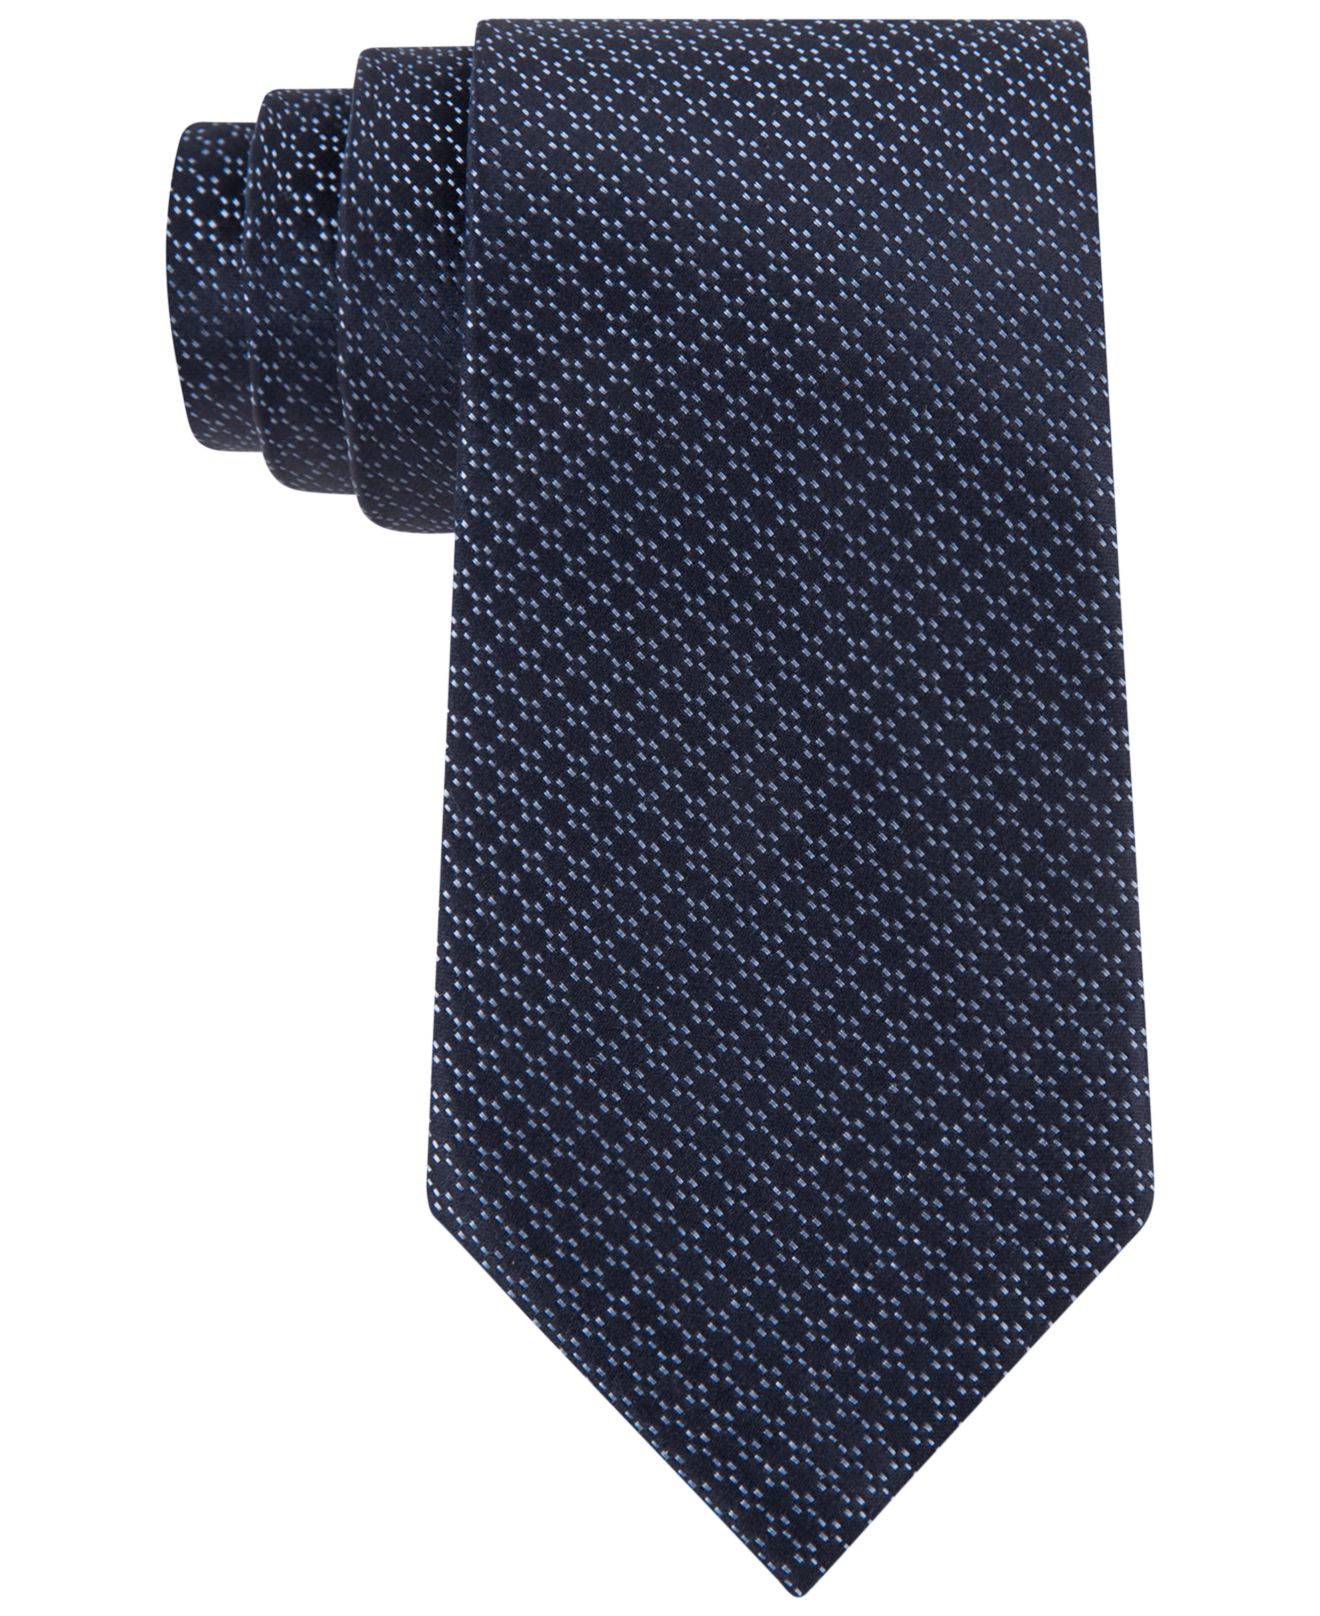 Lyst - Michael Kors Michael Pick And Link Tie in Blue for Men